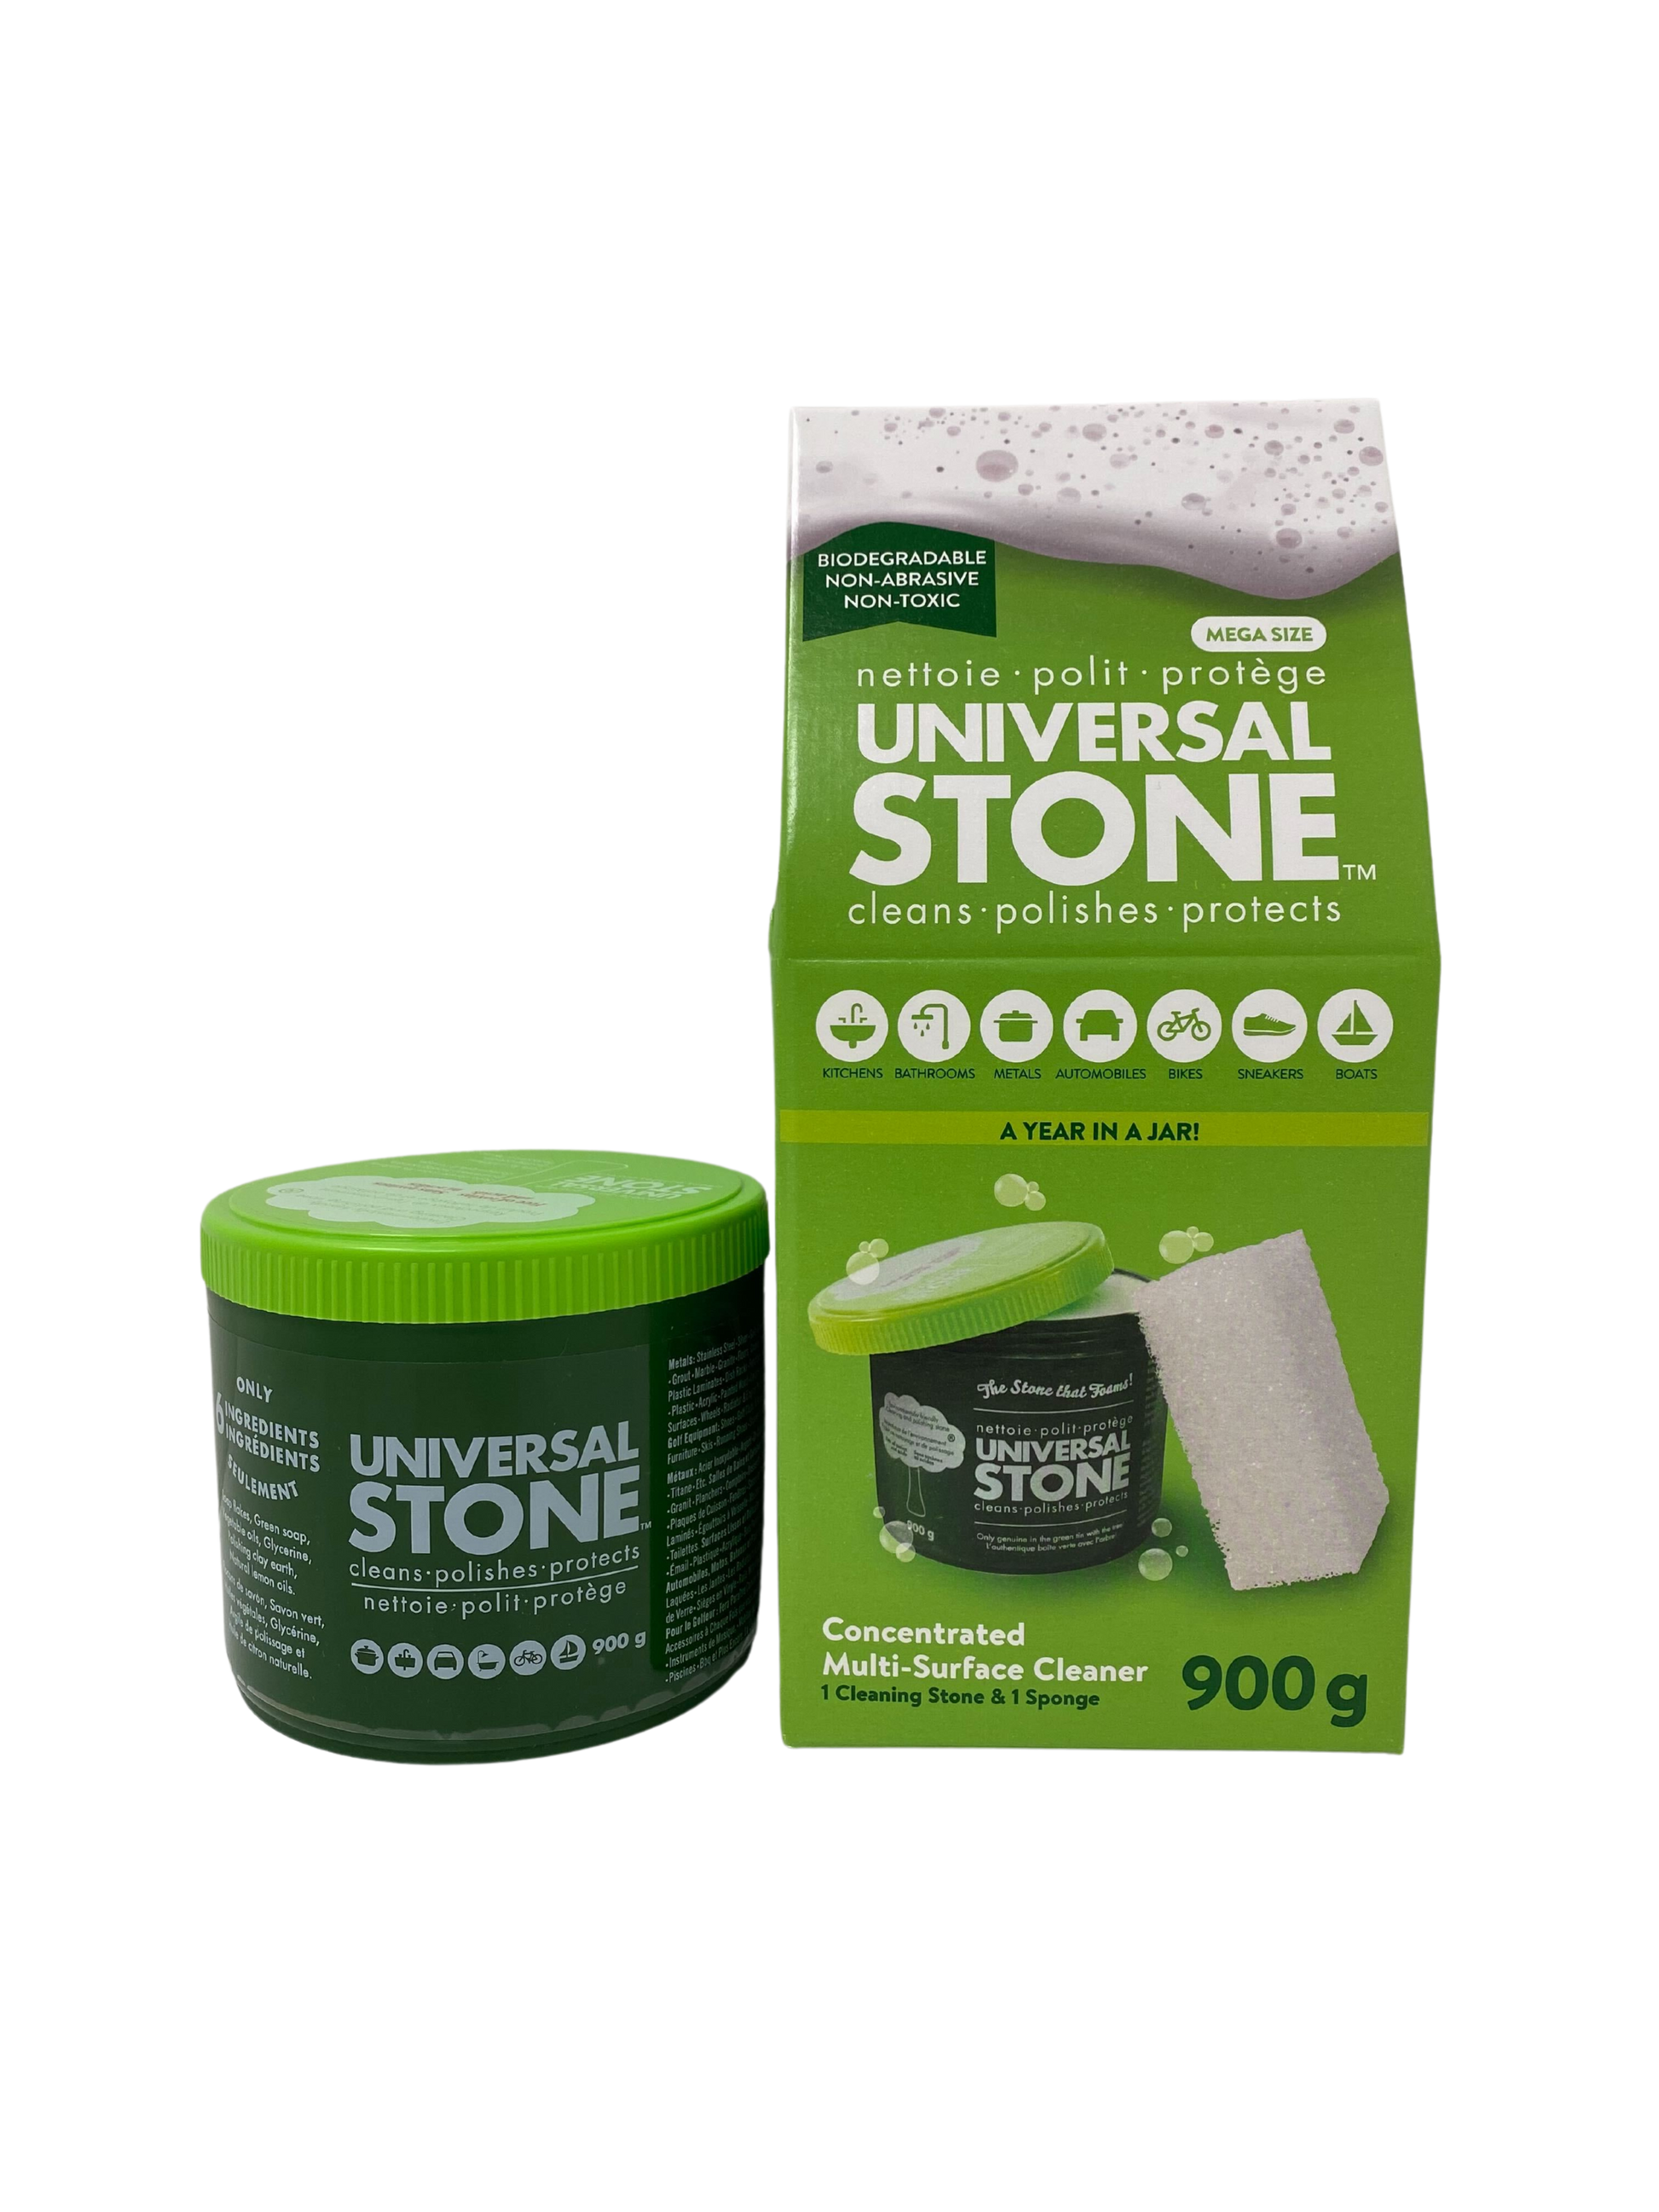 Zielinsky Universal Stone All-Purpose Polisher and Cleaner - Eco-Friendly,  Non-Toxic, Natural